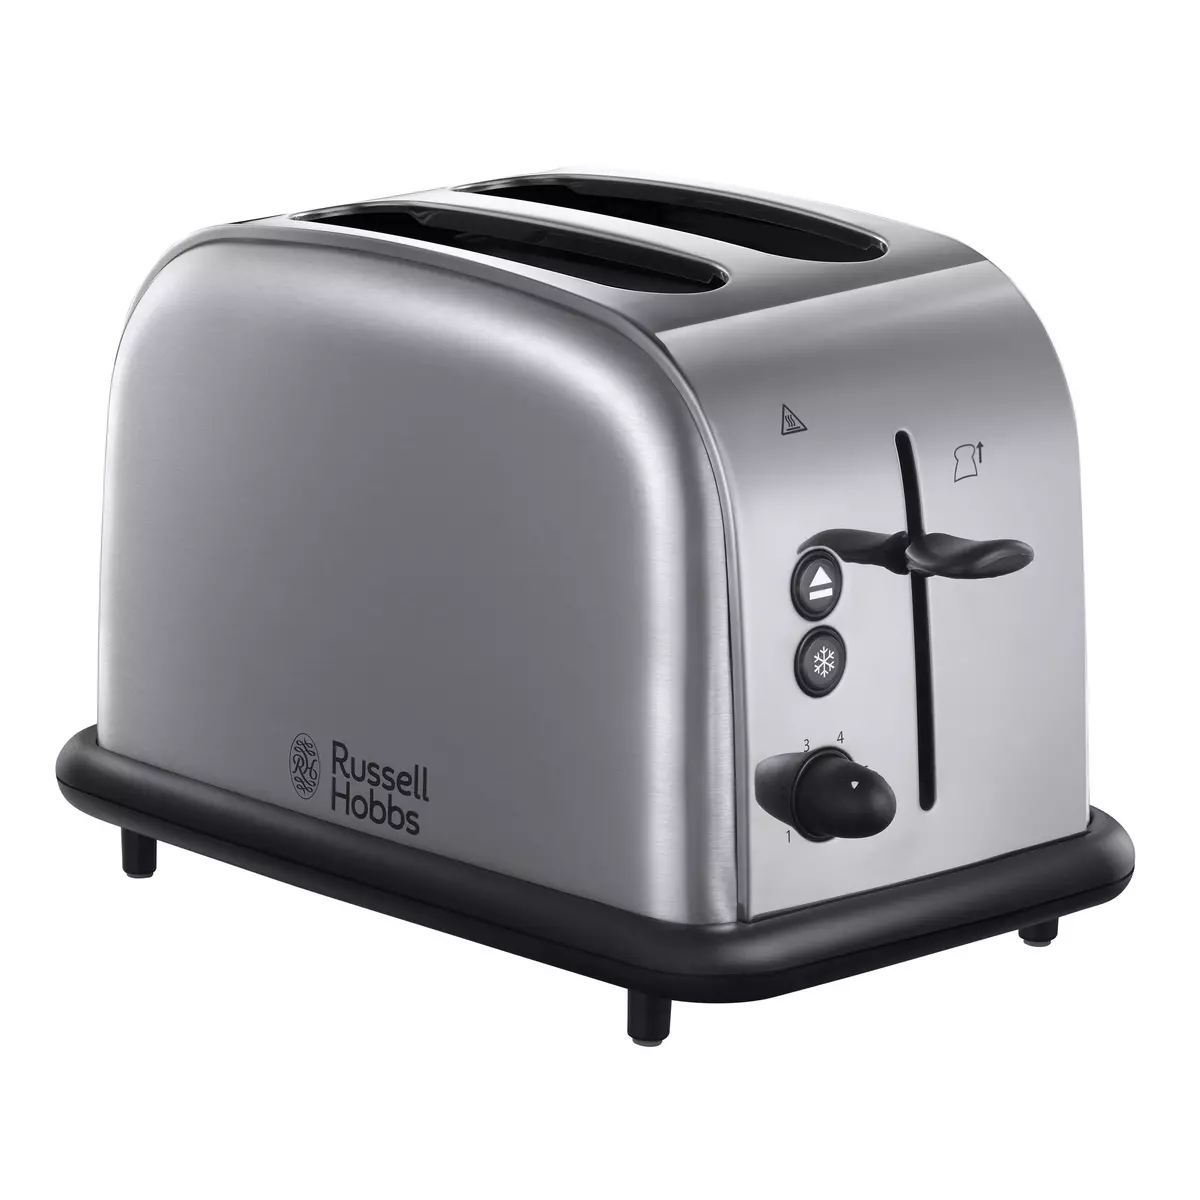 RUSSELL HOBBS Grille pain Oxford 20700-56 Silver